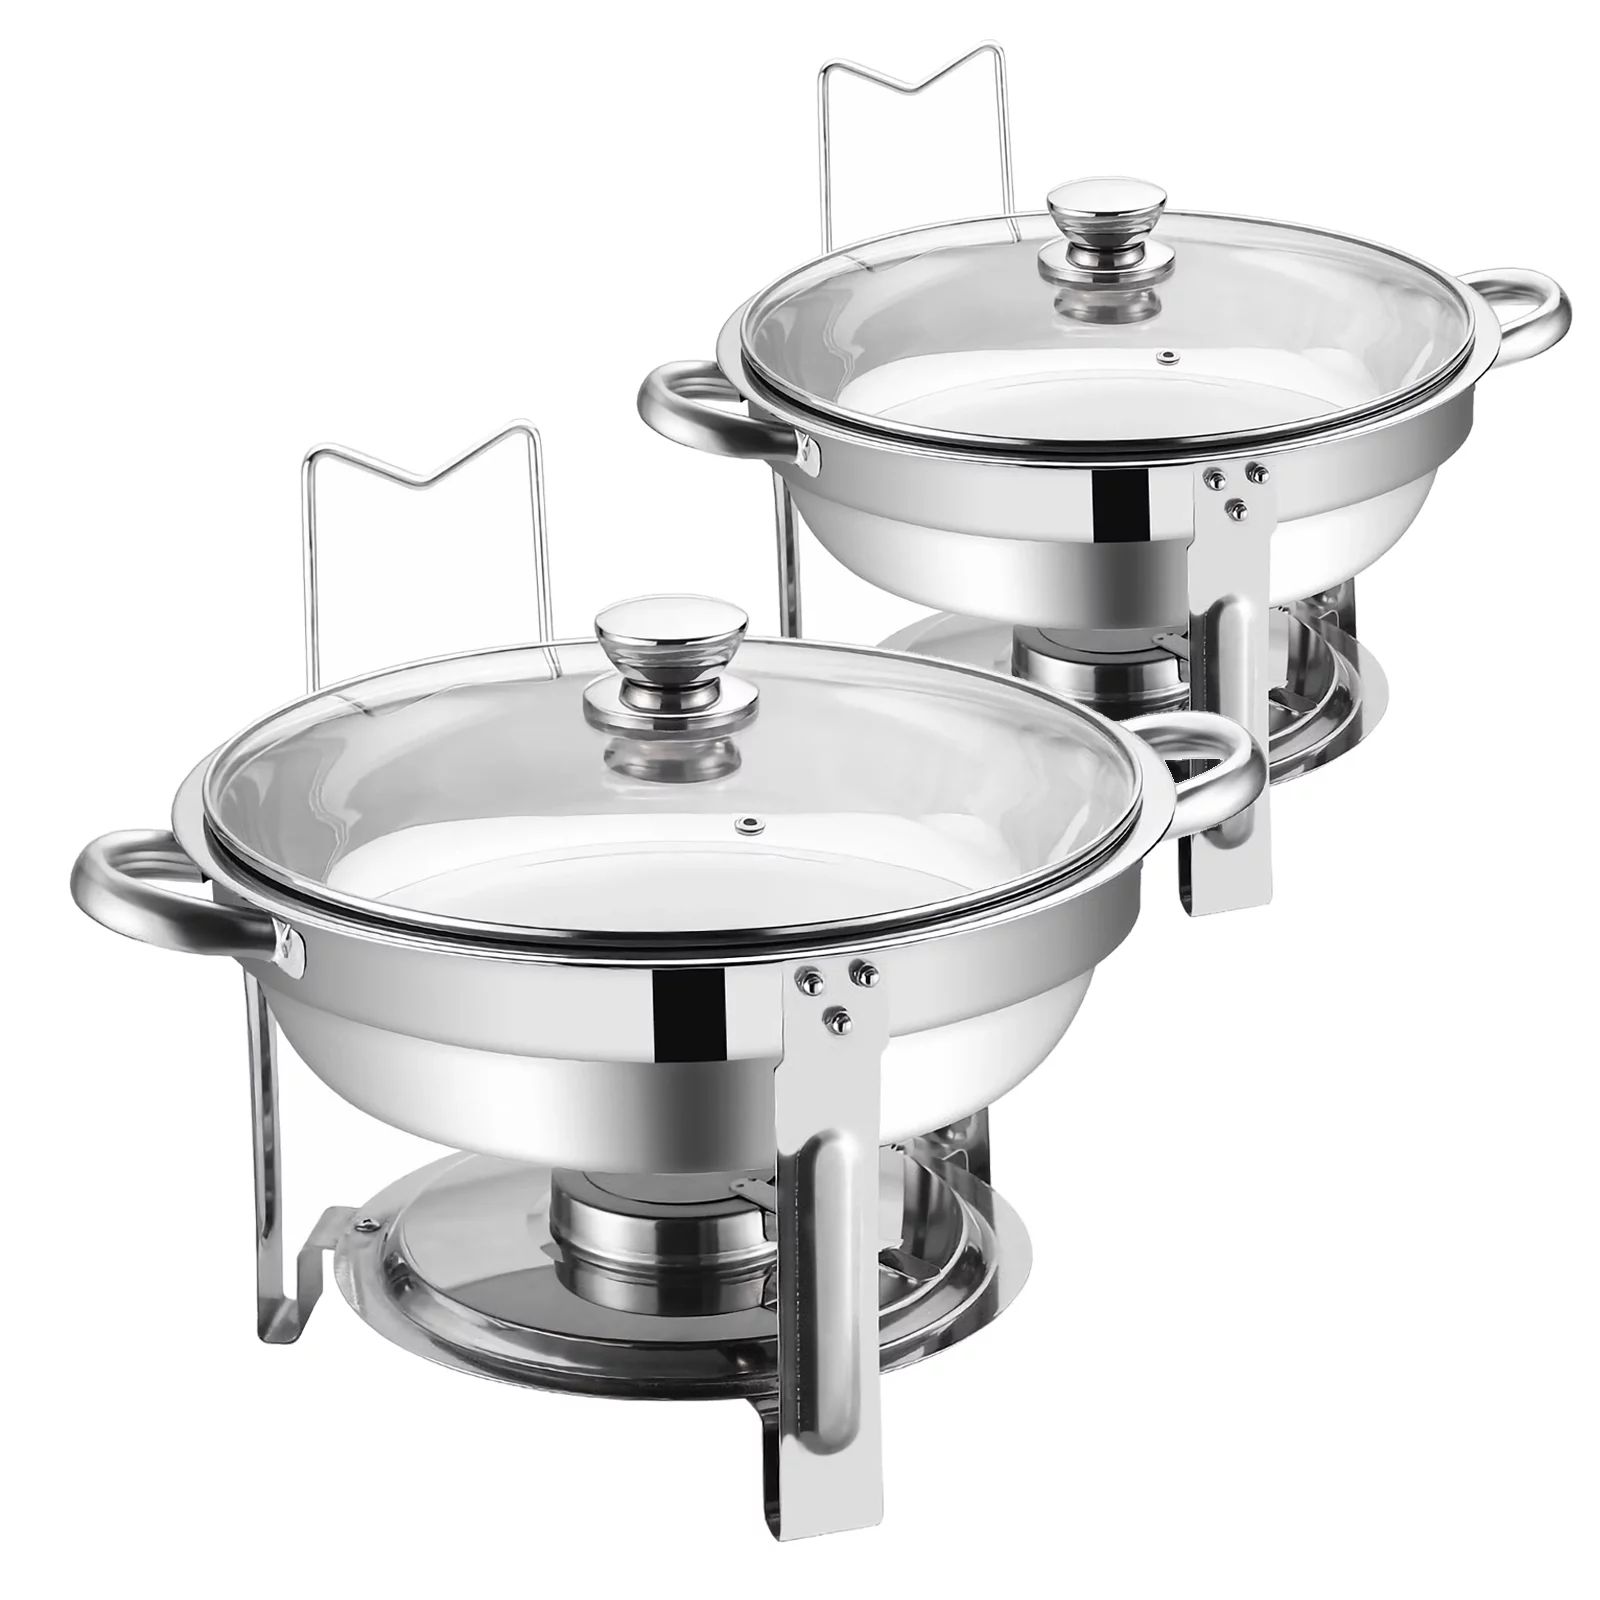 Chafing Dish Buffet Set 2 Pack, TINANA 5QT Stainless Steel Chafing Dishes for Buffet with Glass L... | Walmart (US)